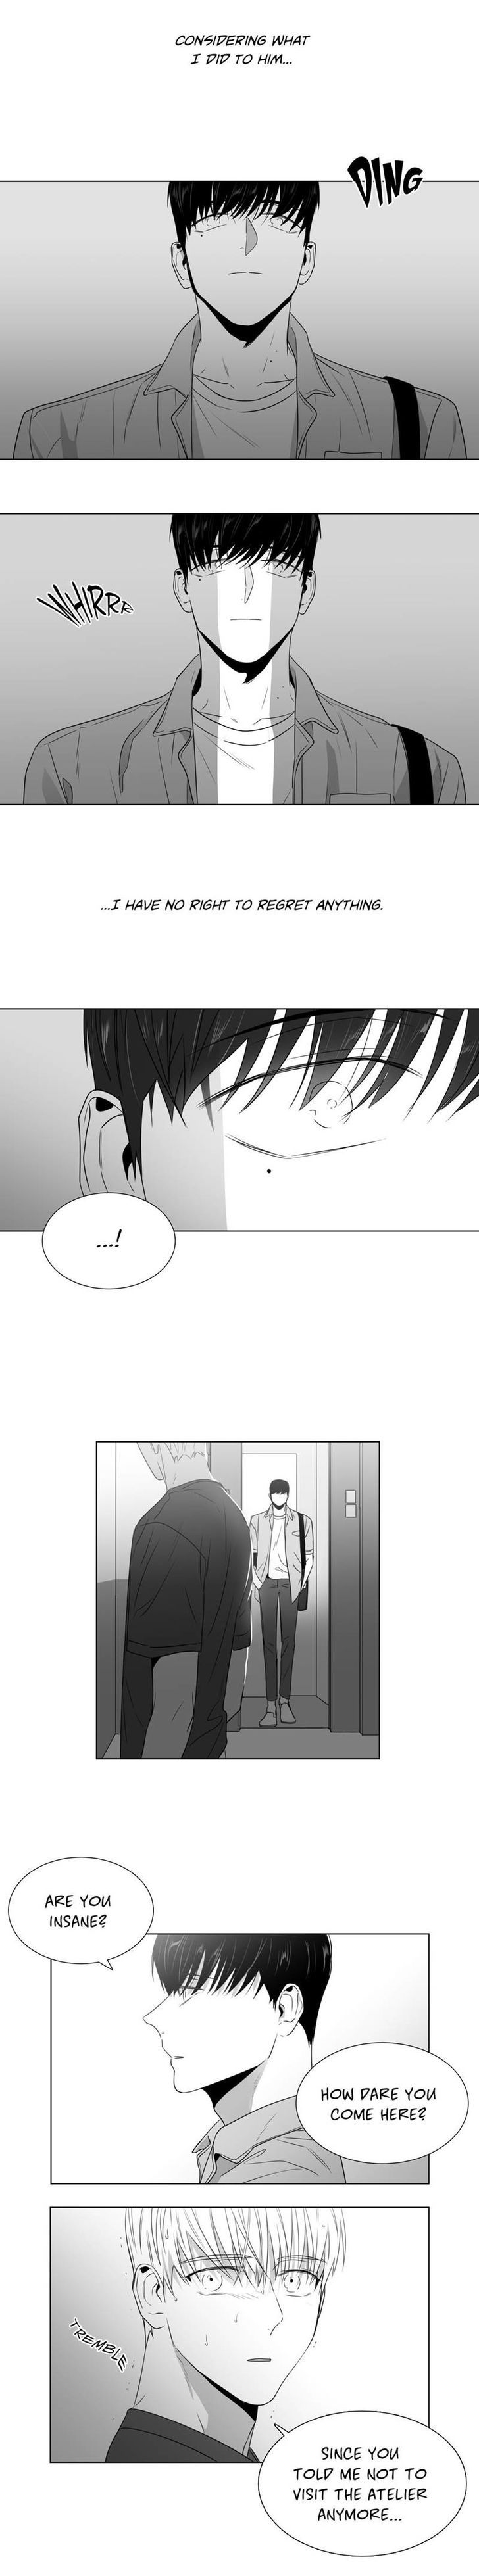 Lover Boy (Lezhin) Chapter 046 page 5